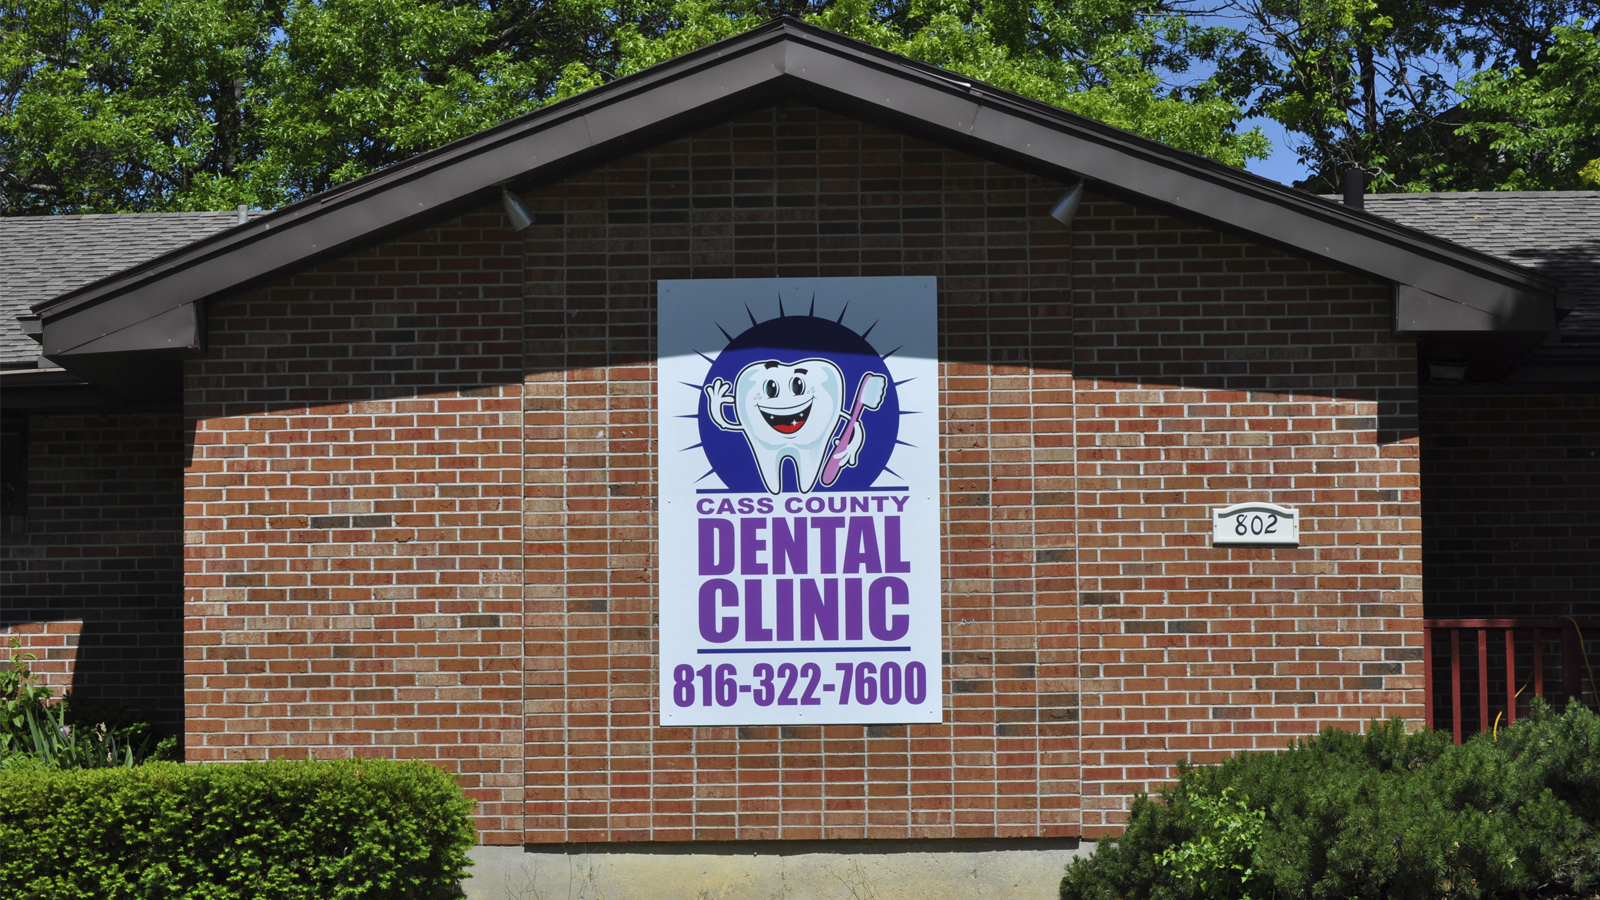 Cass County Dental Clinic launches 10th anniversary campaign